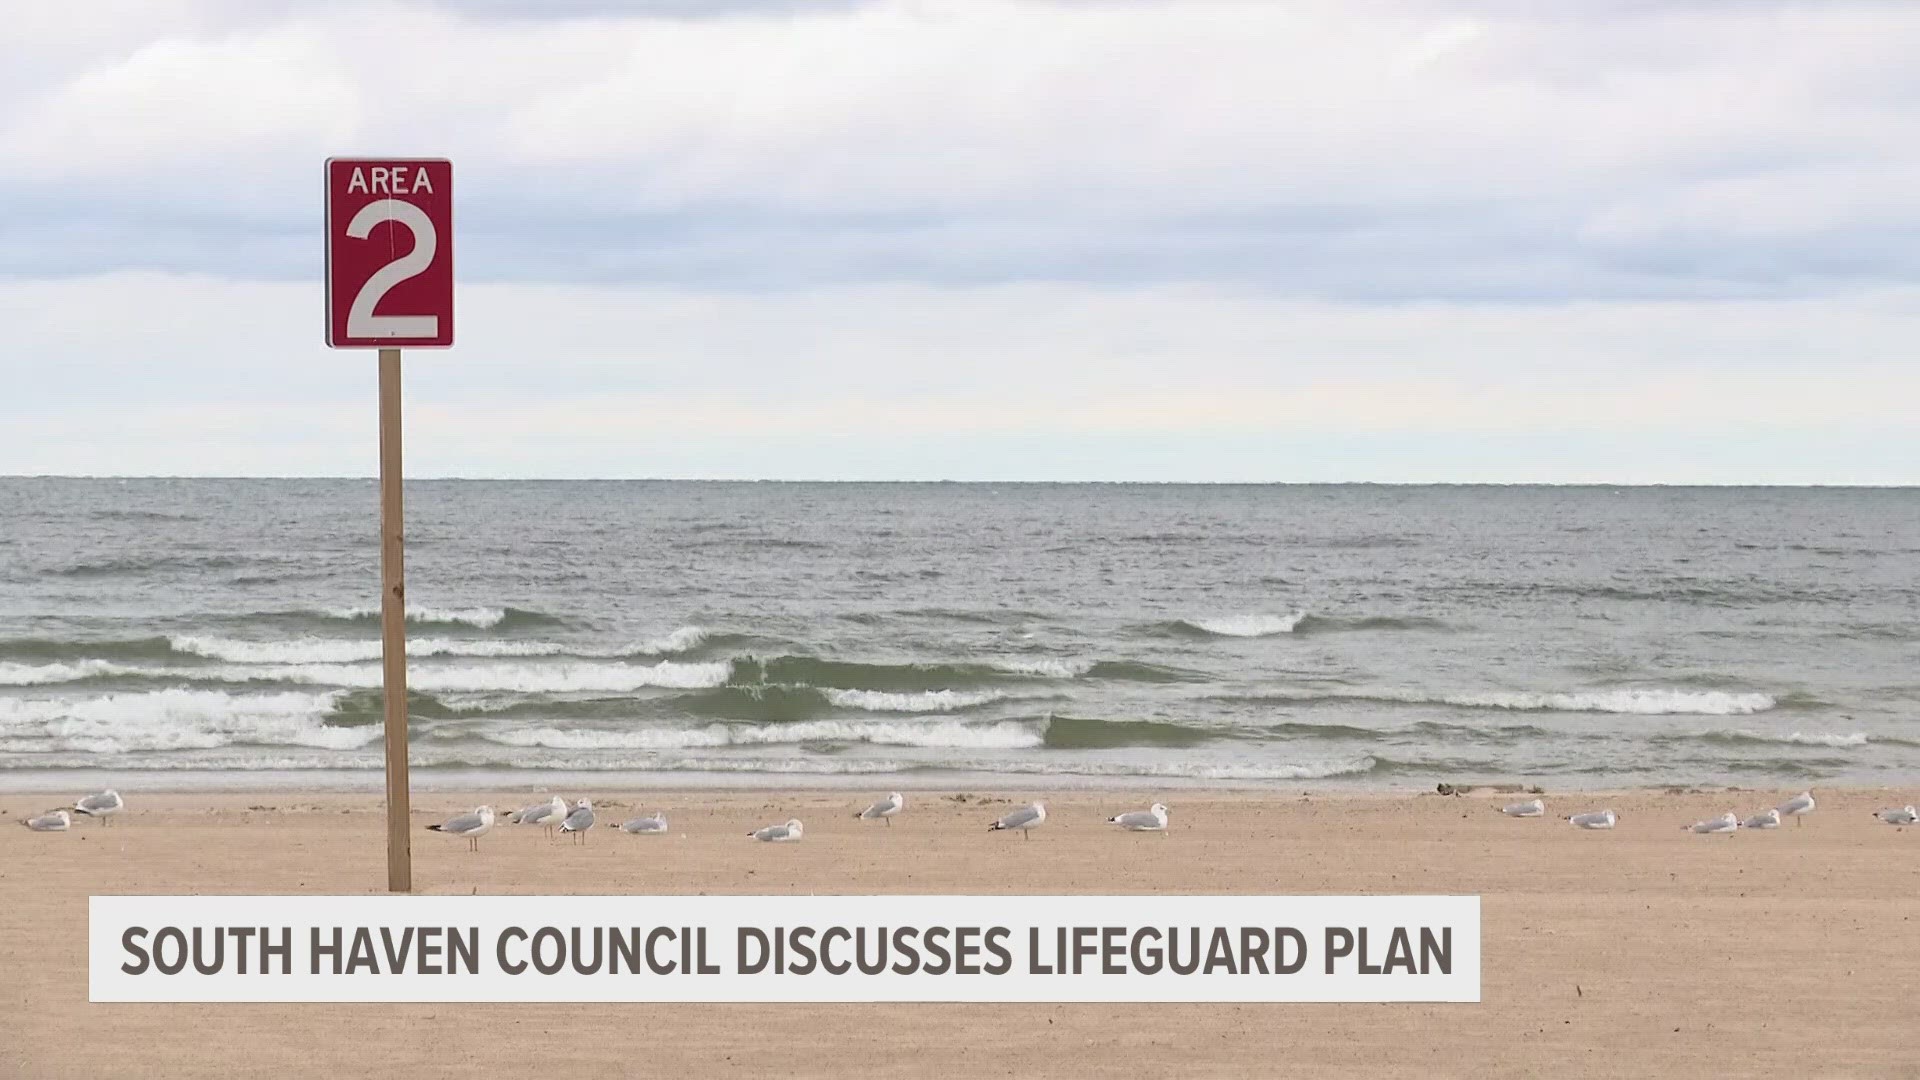 South Haven beaches haven't had lifeguards for over 20 years.